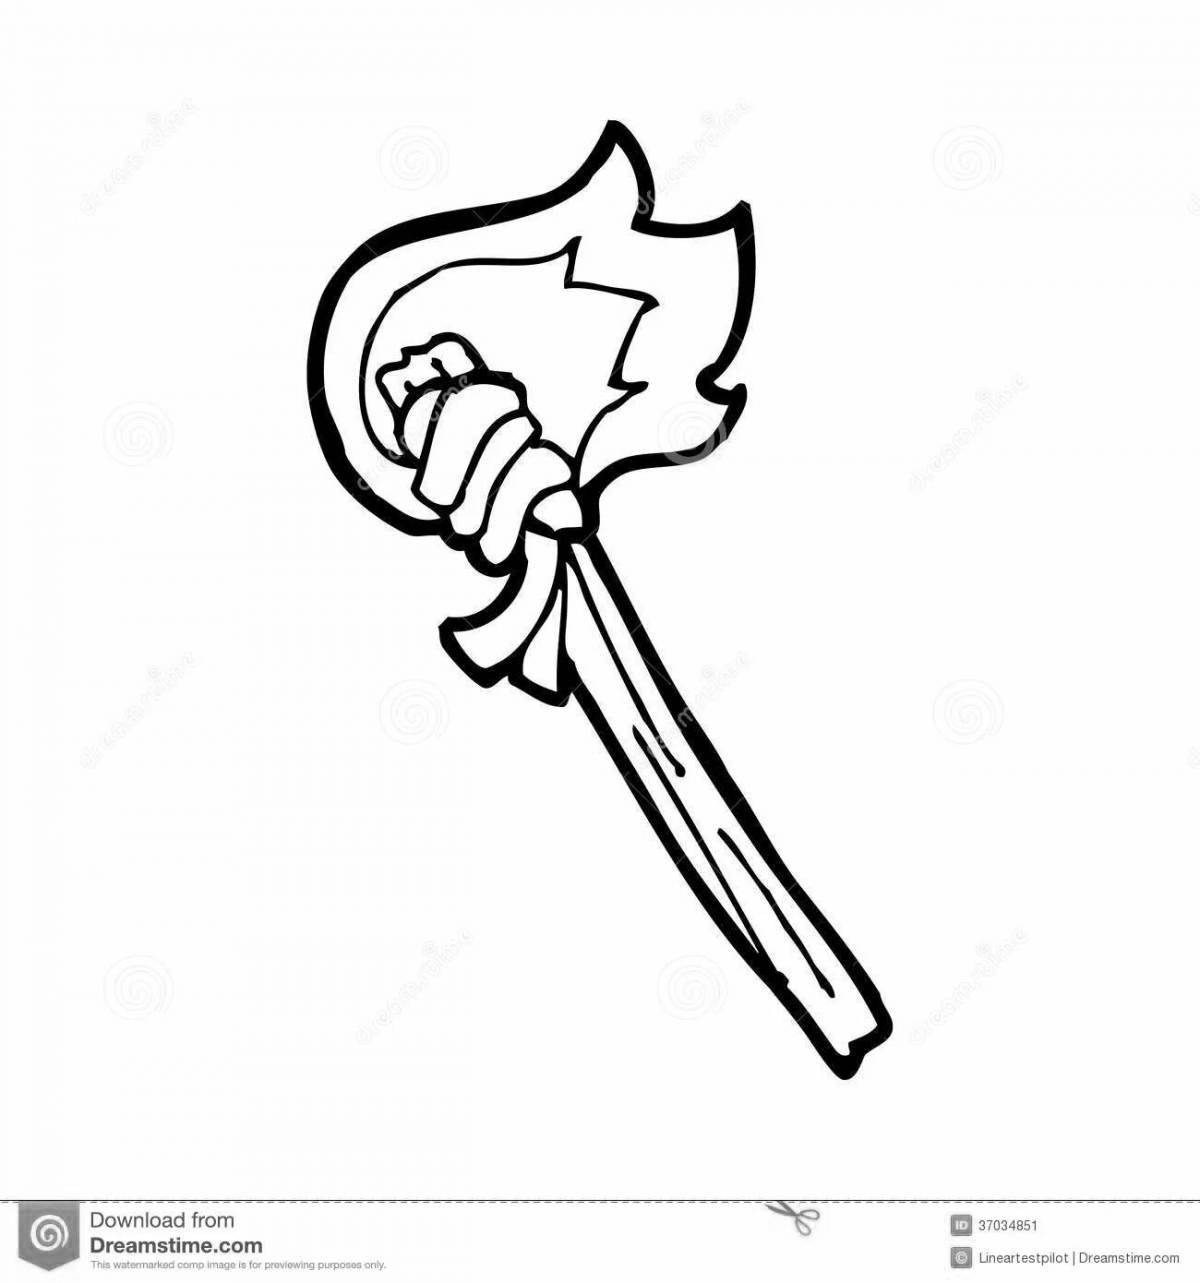 Animated torch coloring page for kids